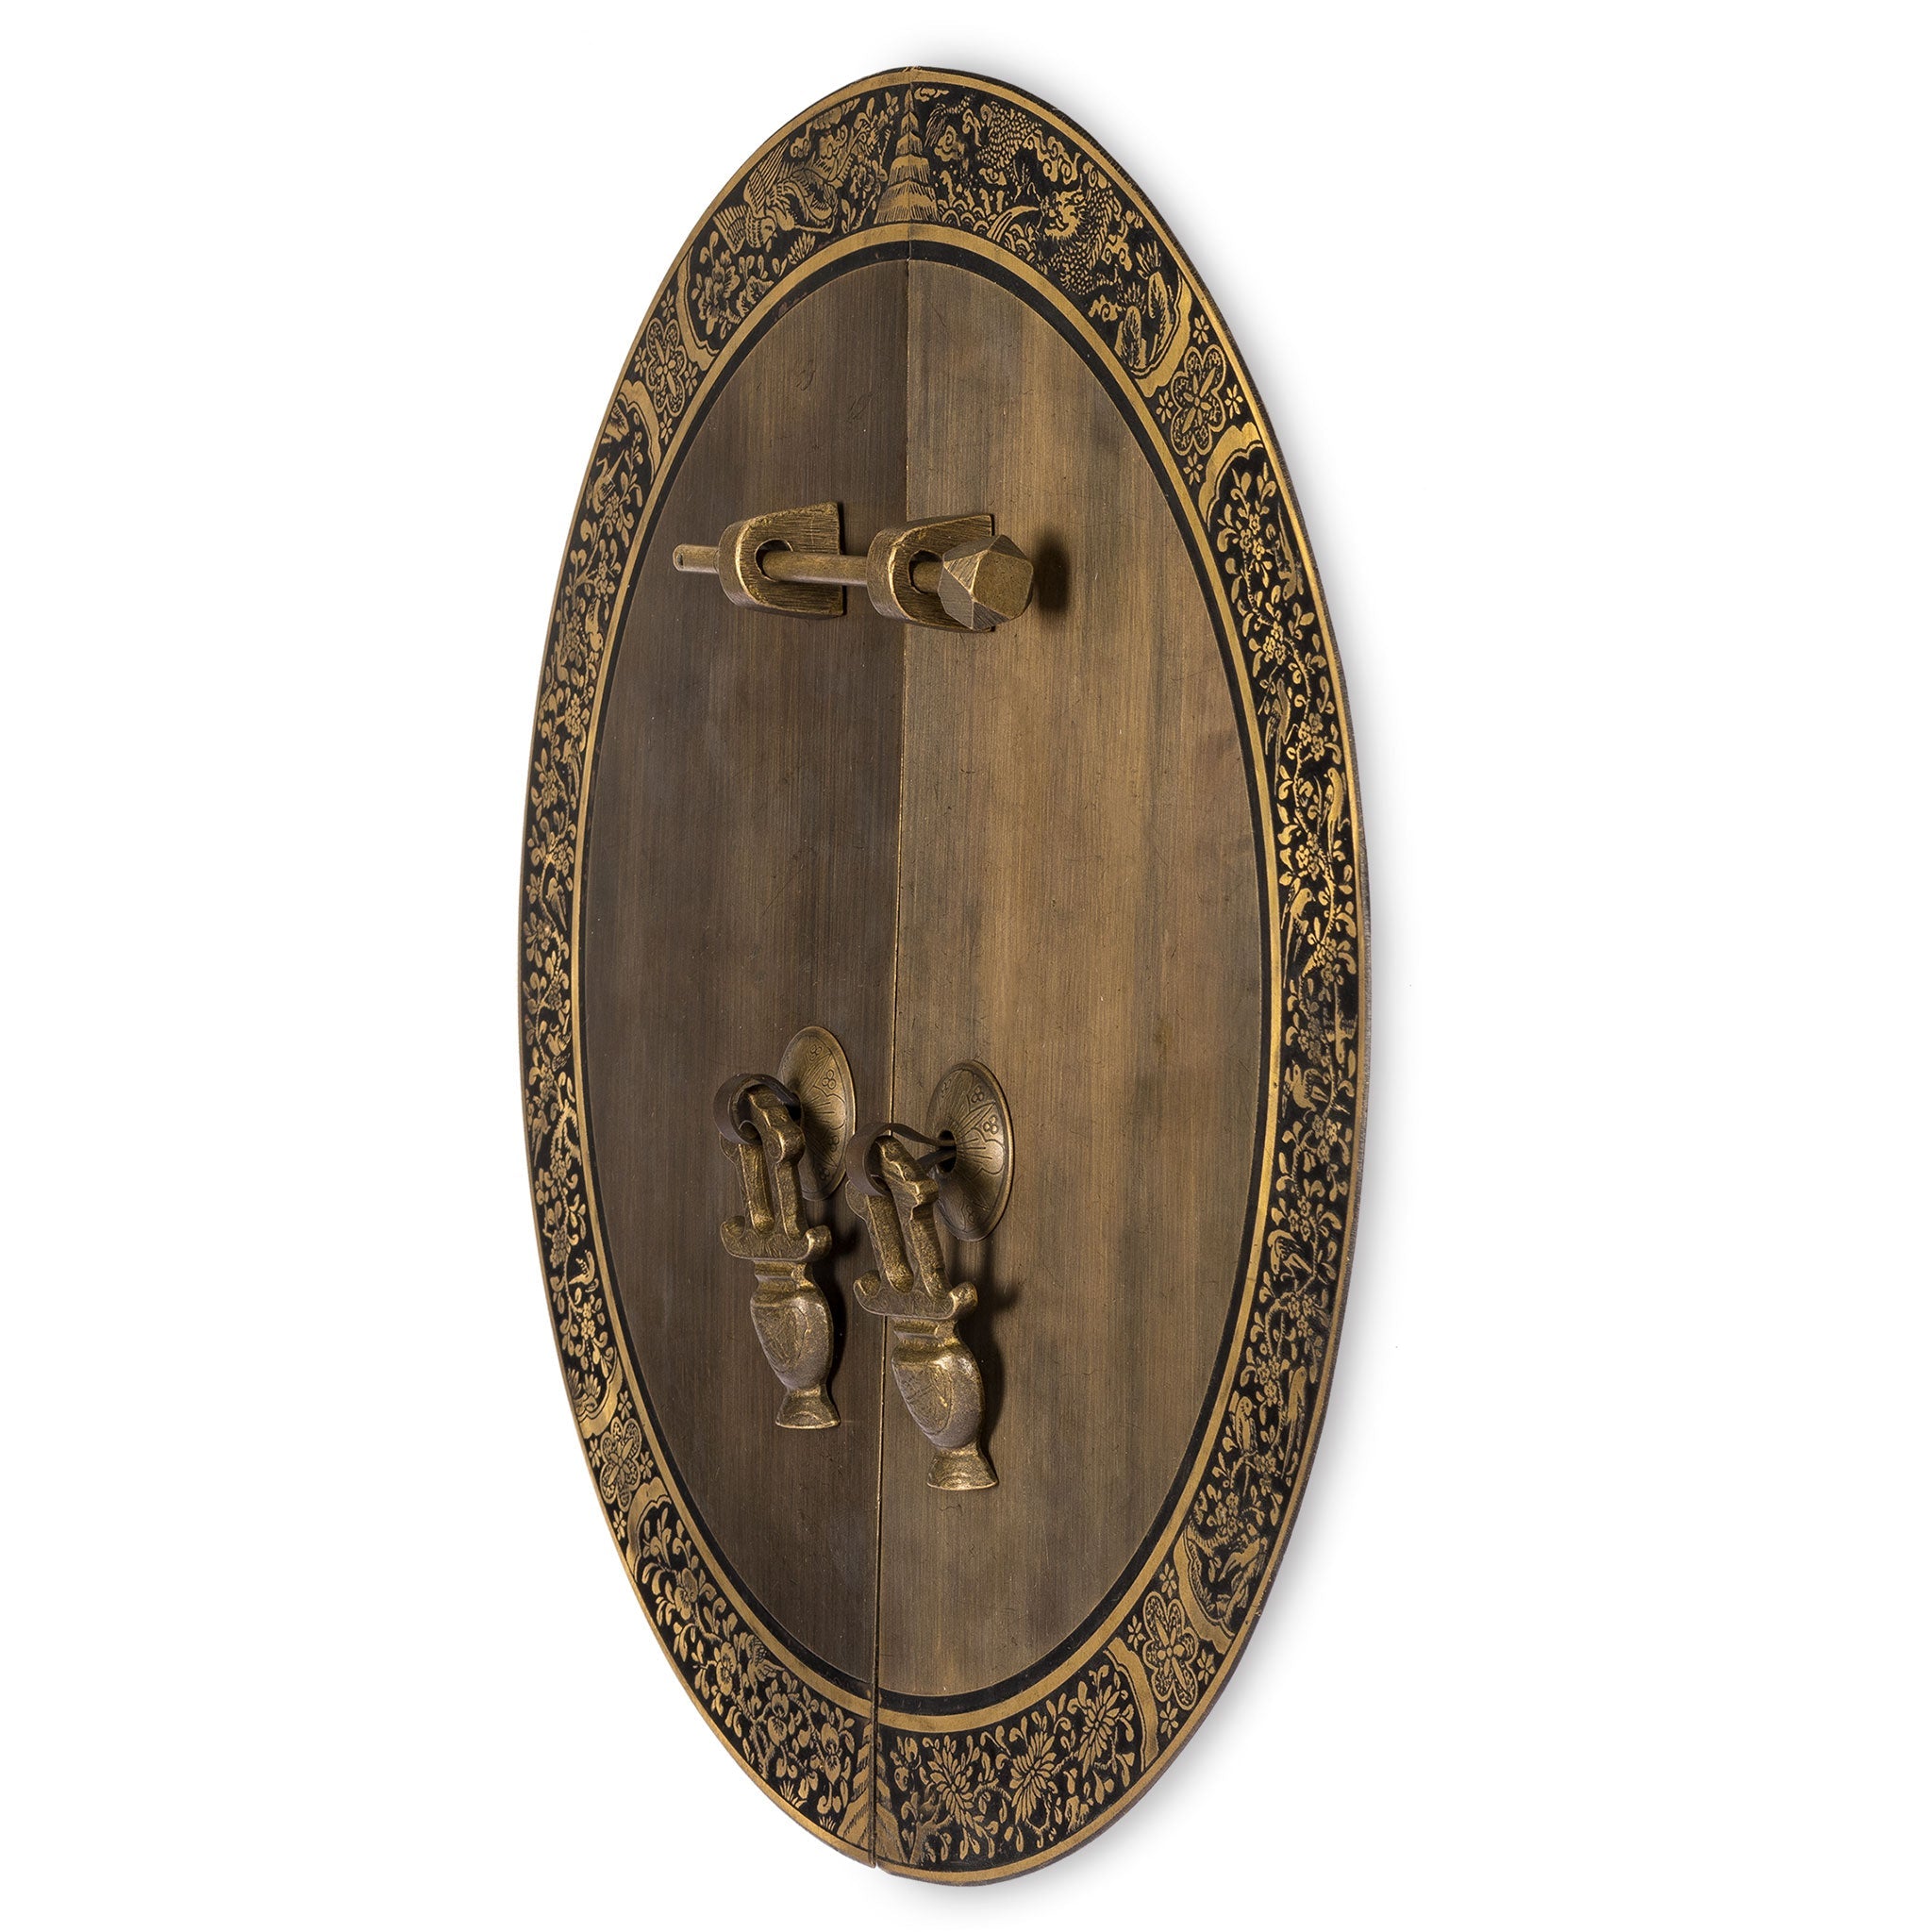 Giant Banquet Face Plate 13.75"-Chinese Brass Hardware